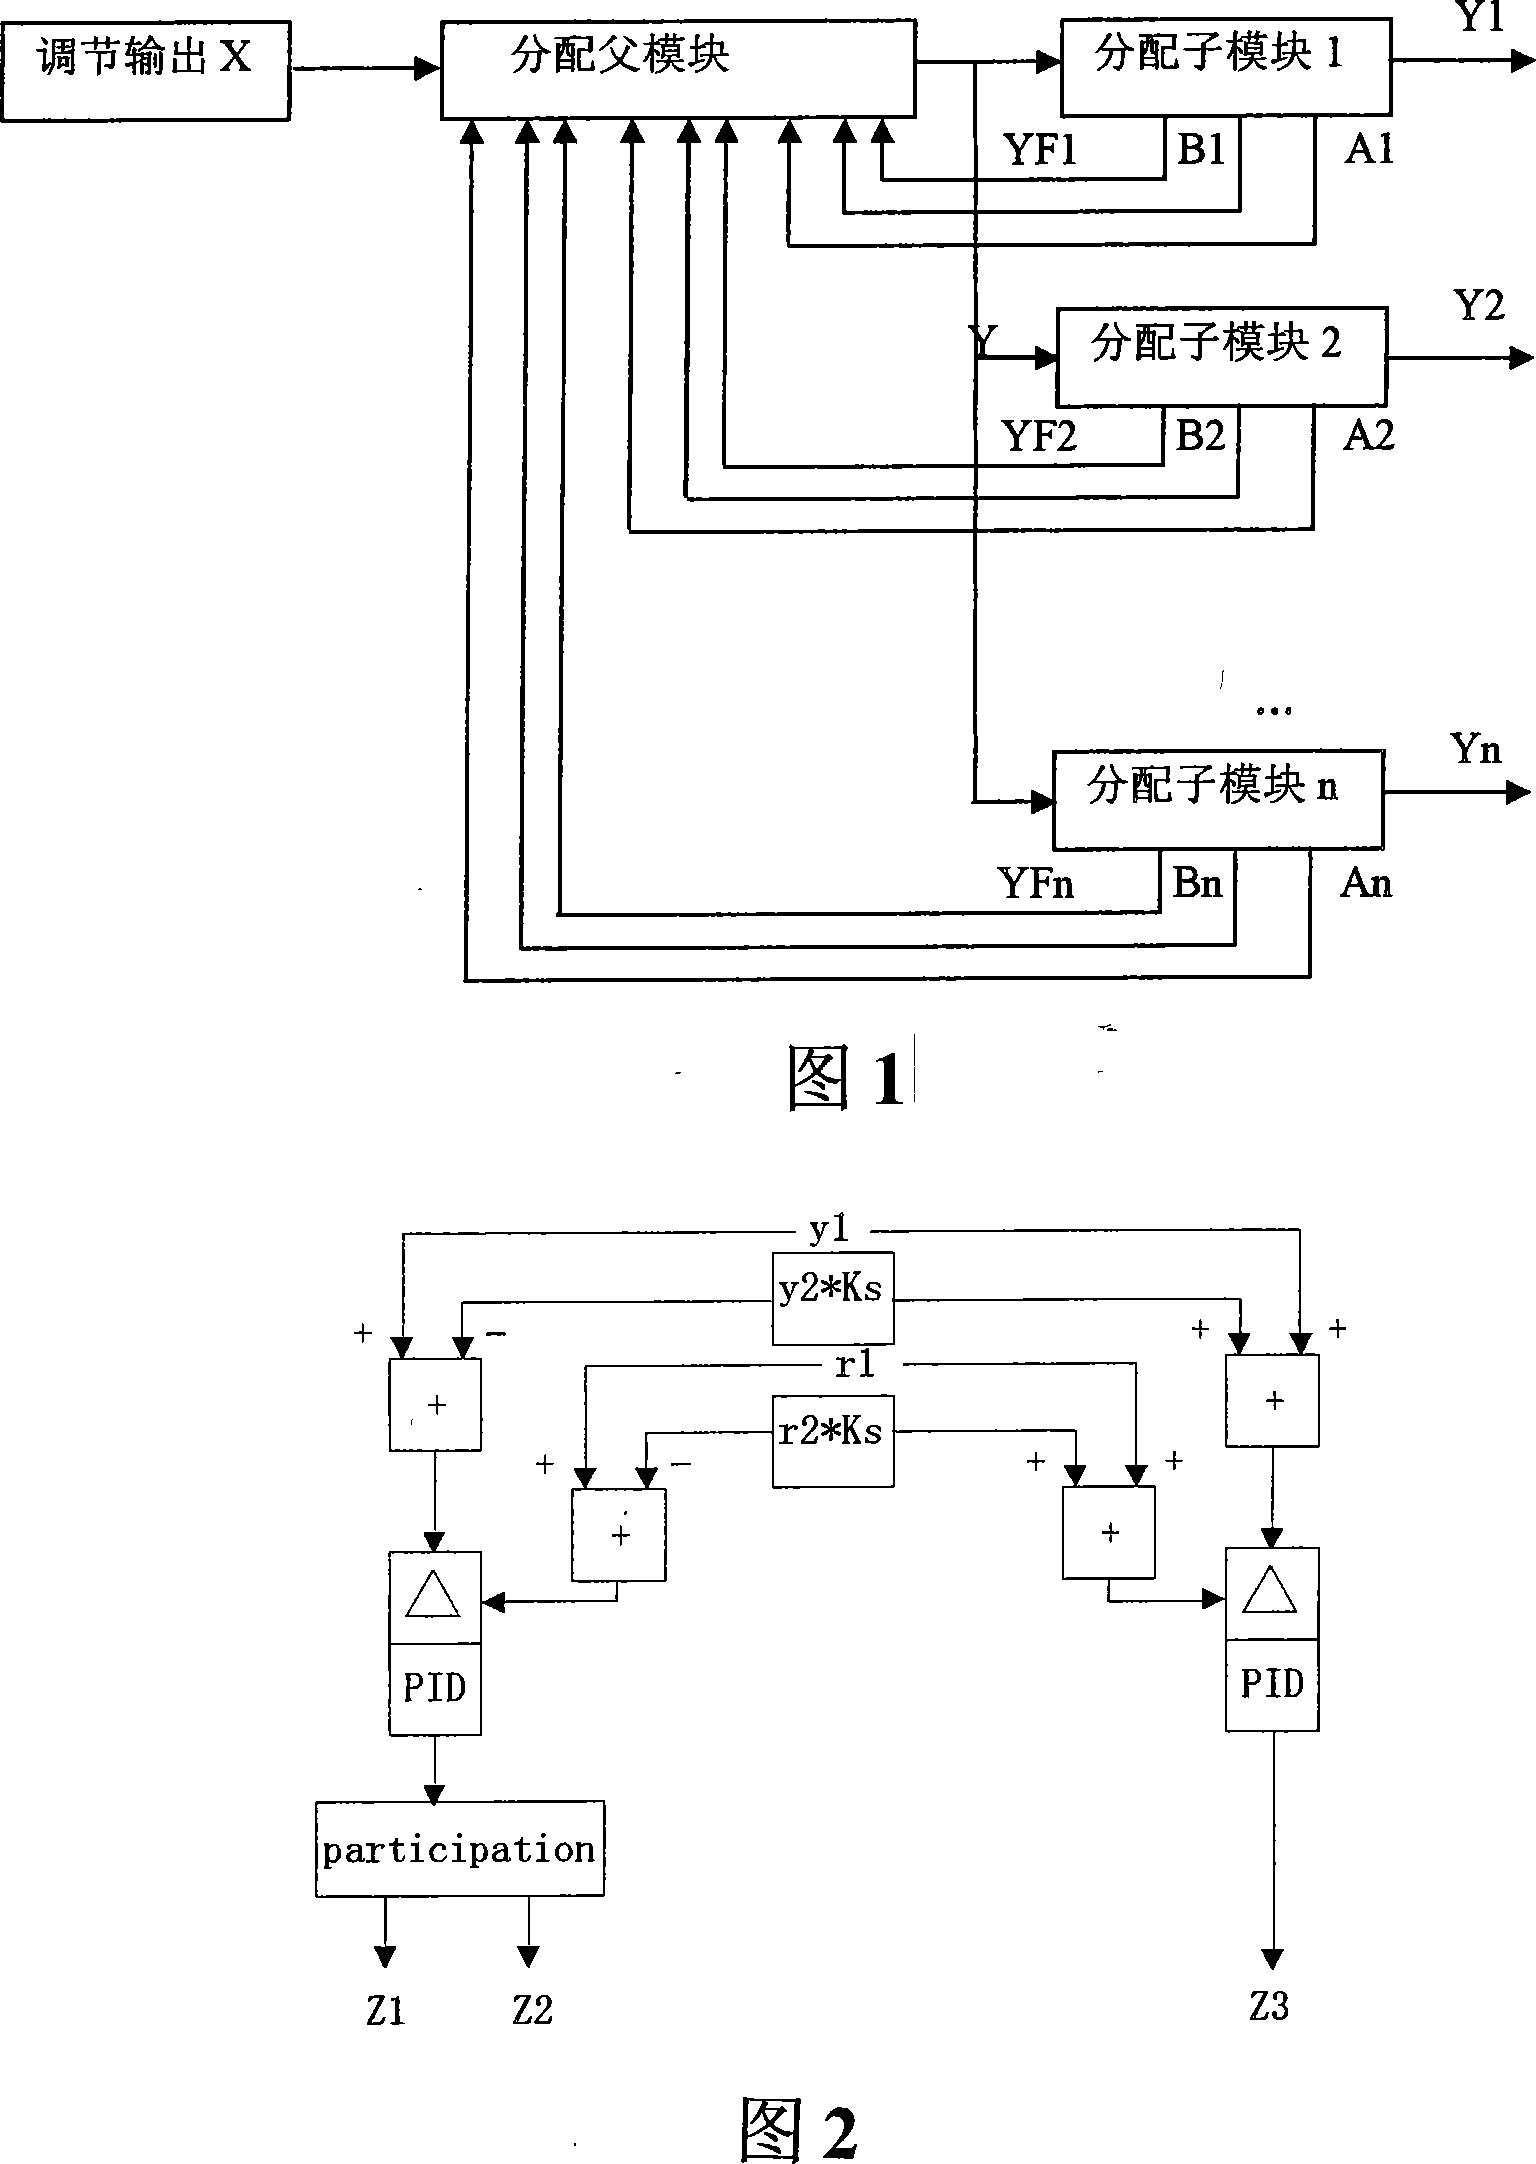 Automatic control method of 300 MW grading circulating fluidized bed units